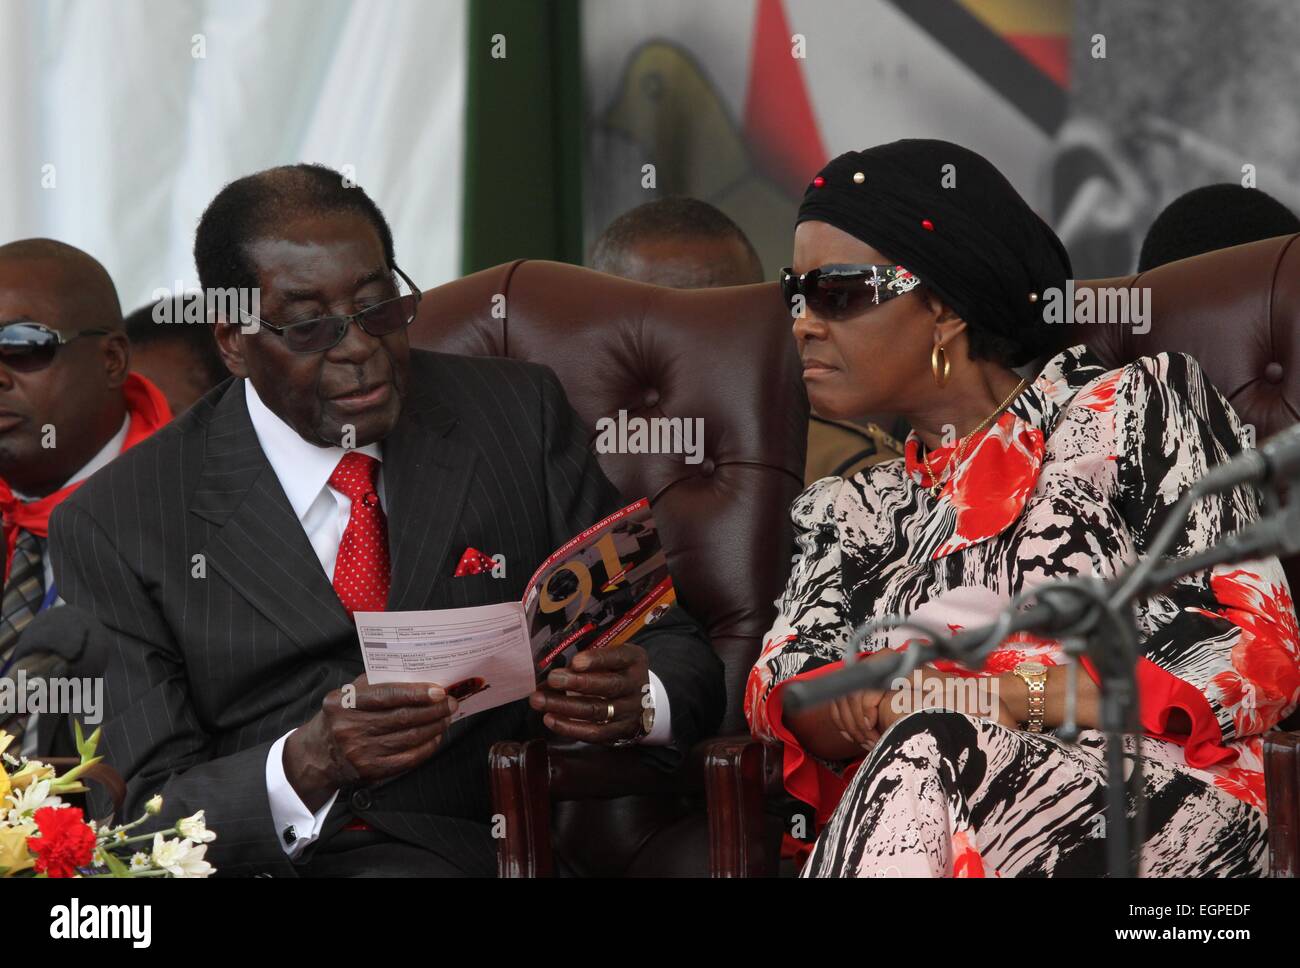 Victoria Falls, Zimbabwe. 28th February, 2015. Zimbabwean President Robert Mugabe (L) and his wife Grace Mugabe browse a brochure on the podium at a public celebration held to mark his 91st birthday in Victoria Falls, Zimbabwe, Feb. 28, 2015. Mugabe, who turns 91 this month, is the oldest leader in the world and one of the longest-serving African statesmen. Having ruled Zimbabwe for 35 years since independence, Mugabe was endorsed by the ruling ZANU-PF party as the sole candidate to contest at the age of 94 in the next presidential election in 2018. Credit:  Xinhua/Alamy Live News Stock Photo